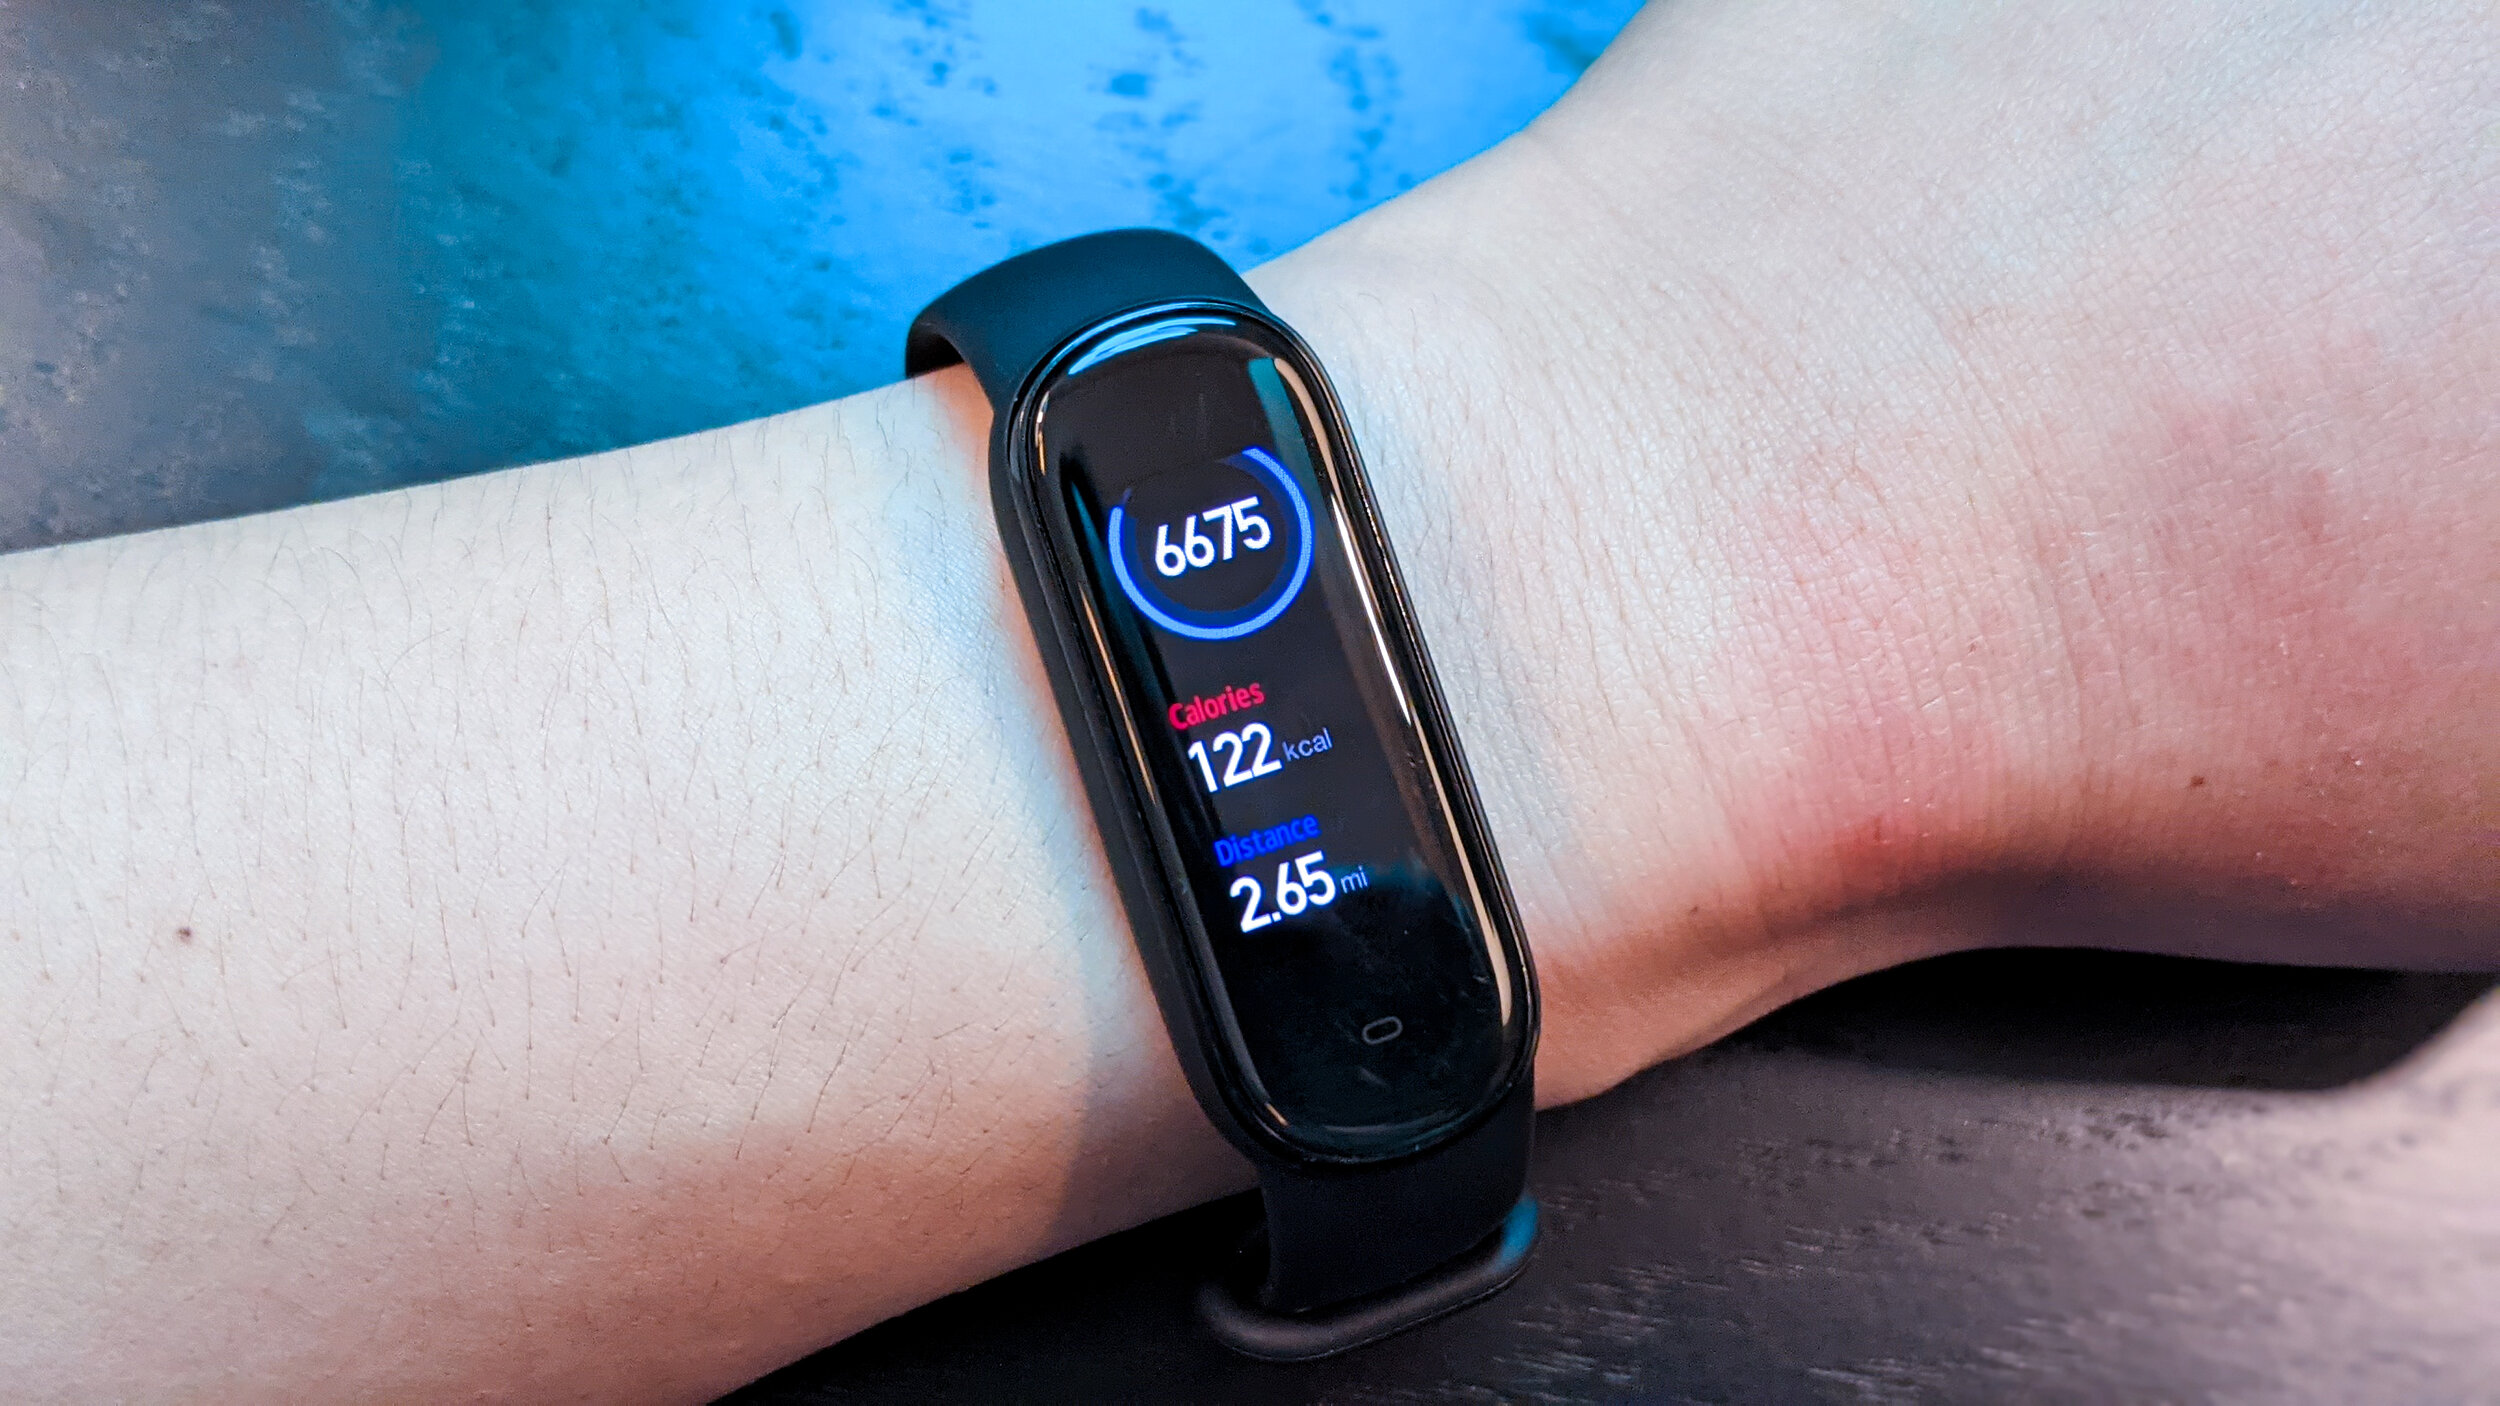 Xiaomi Mi Band 5 vs Amazfit Band 5: Which fitness band offers best value?